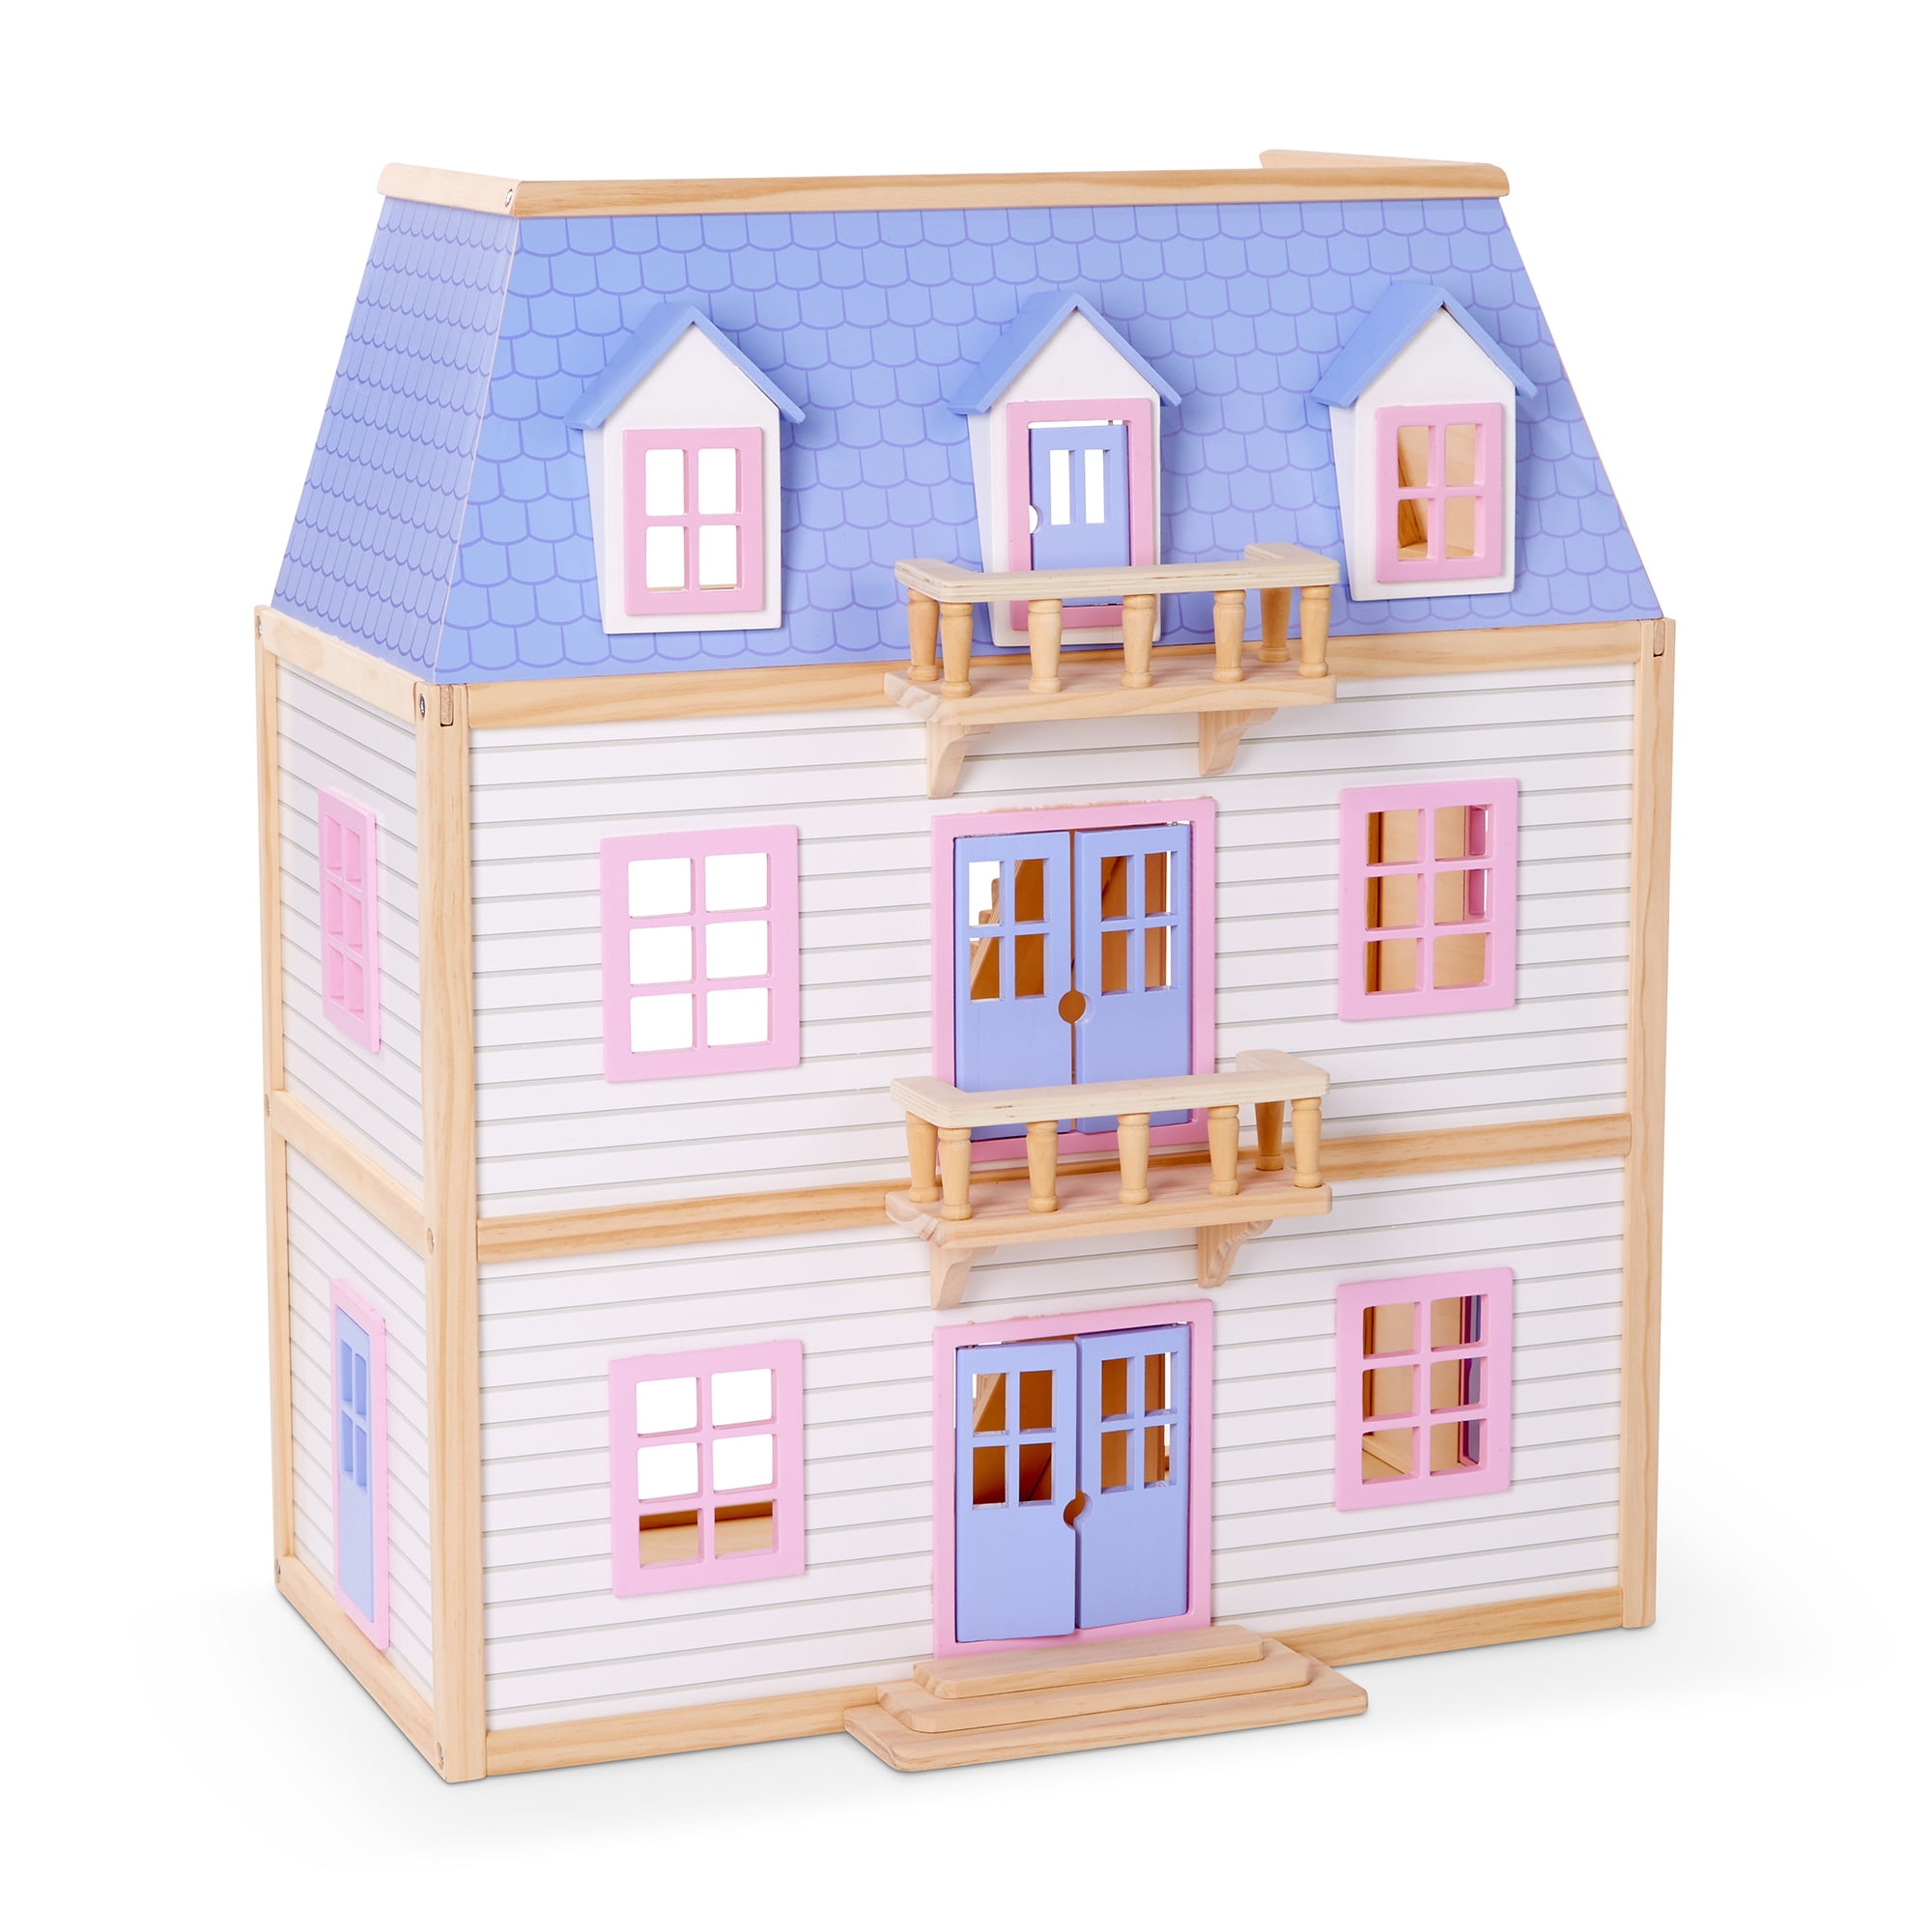 Melissa & Doug Fold and Go Wooden Dollhouse Brand New Free Shipping!!! 